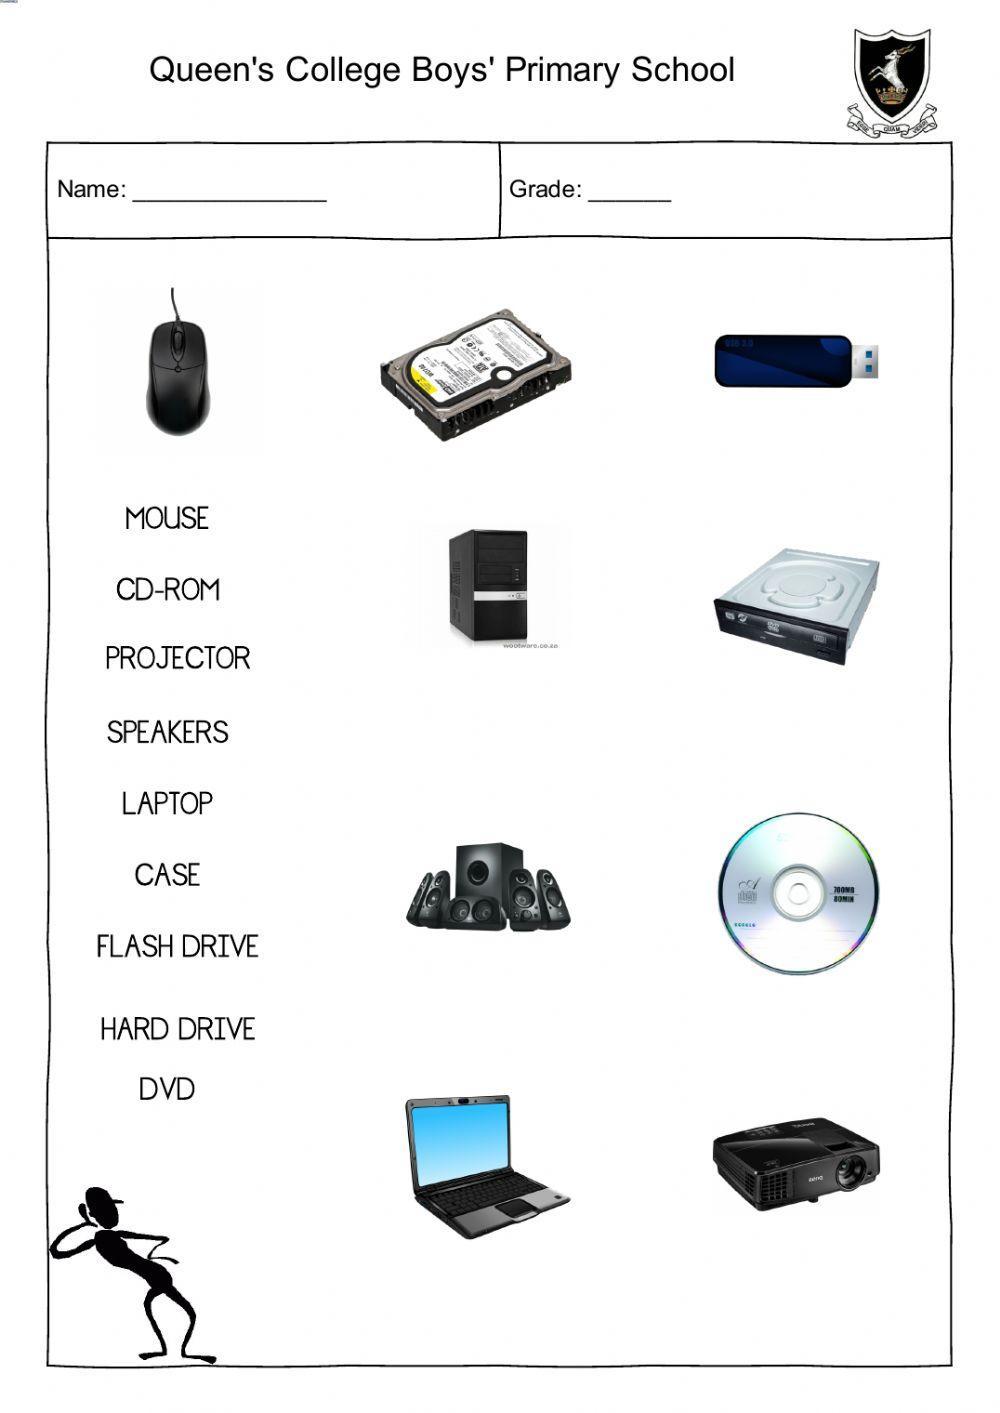 Computer parts and peripherals